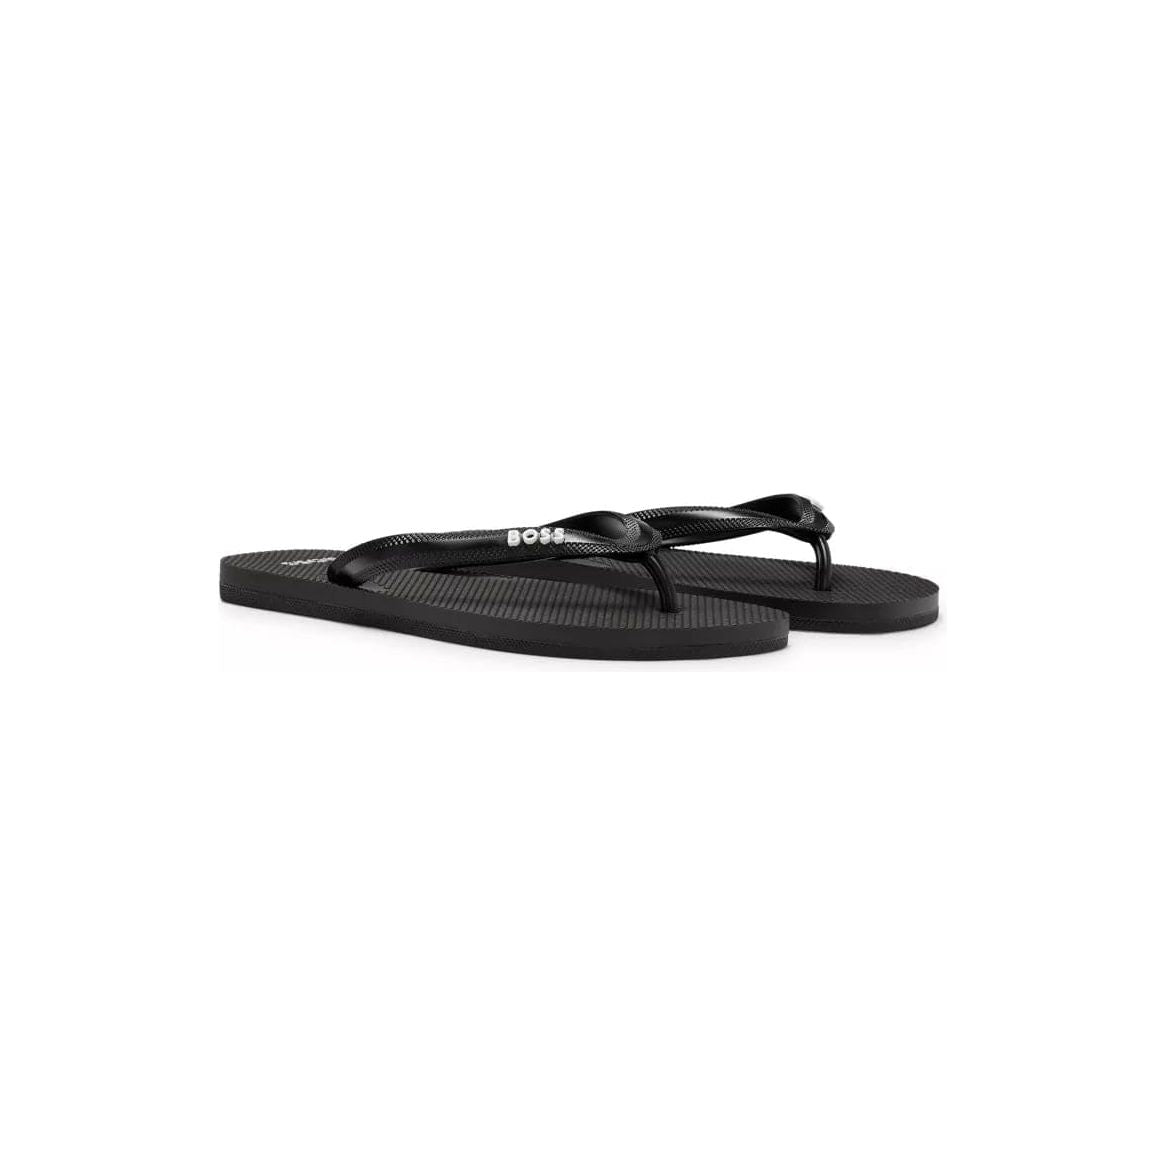 BOSS ITALIAN-MADE FLIP-FLOPS WITH BRANDED STRAP - Yooto